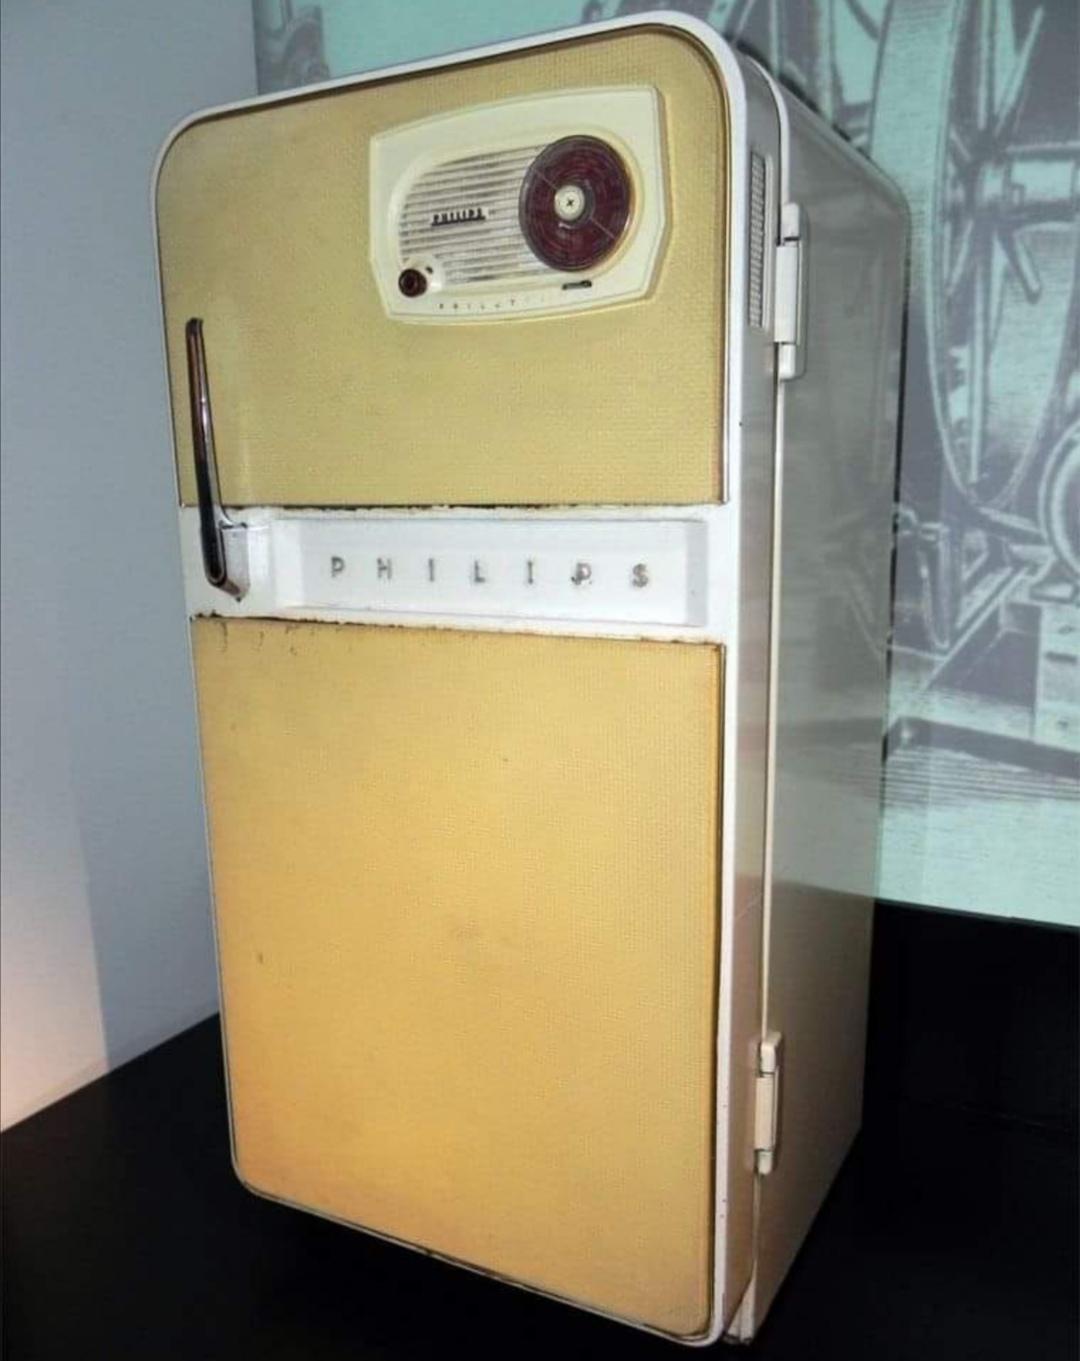 A+Phillips+fridge+from+1956+with+a+built+in+radio